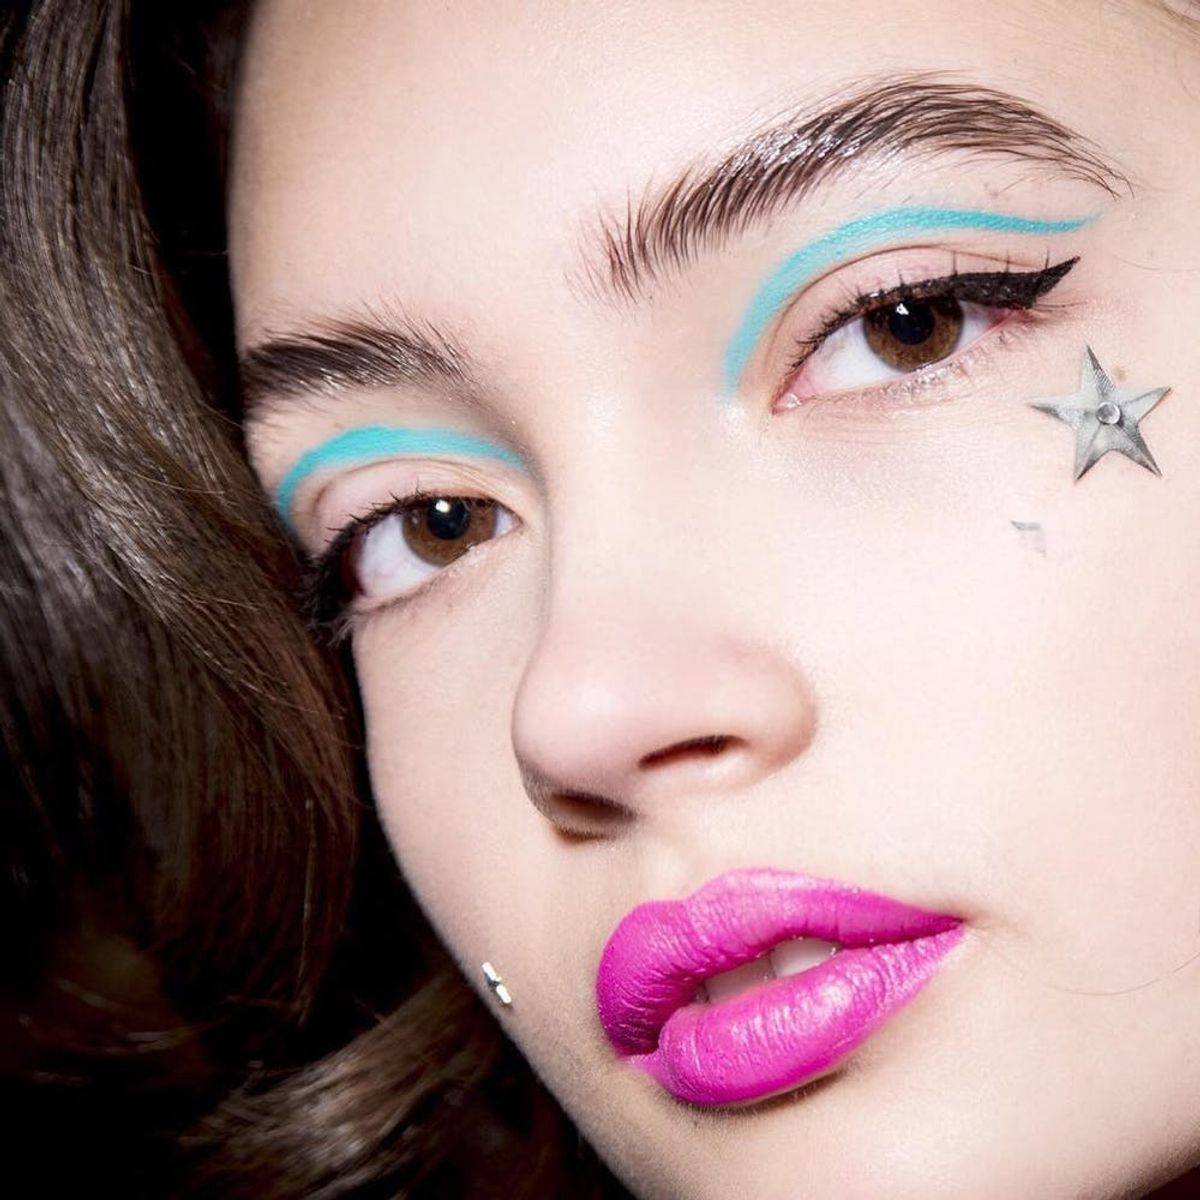 This Instagram Eyeliner Trend Might Be Cooler Than a Cat-Eye